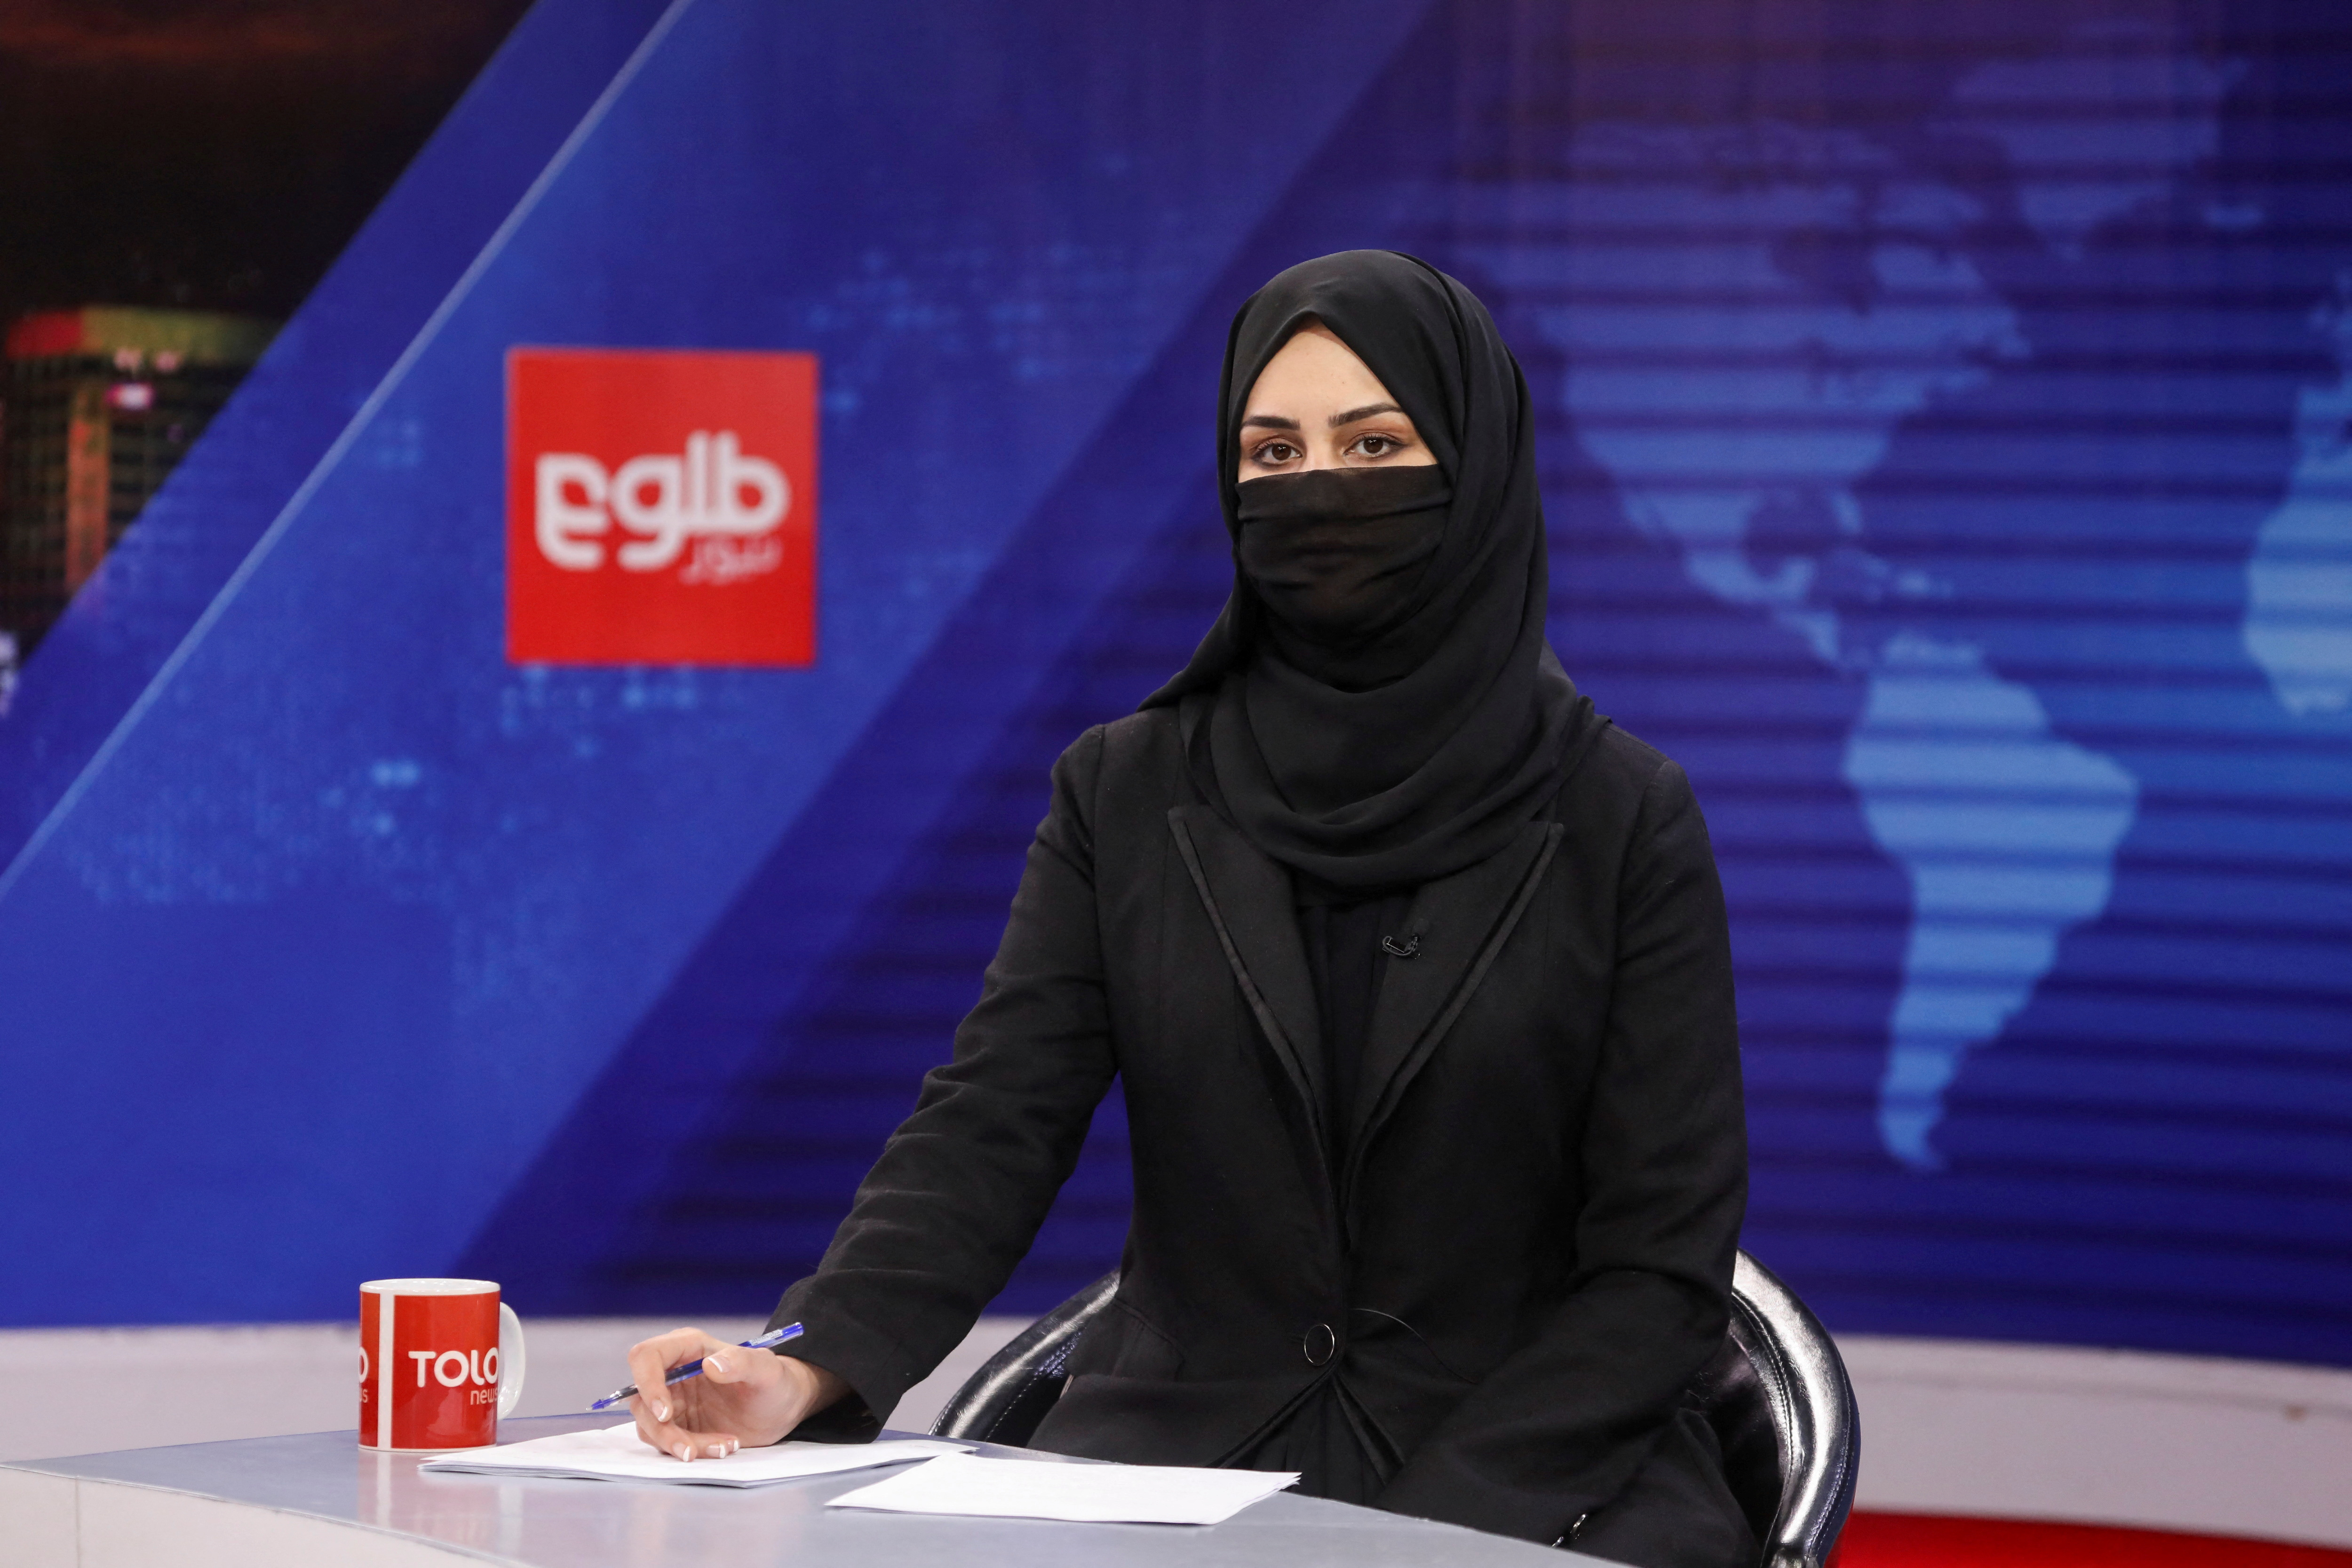 A female presenter for Tolo News, Khatereh Ahmadi, while covering her face, works in a newsroom at Tolo TV station in Kabul